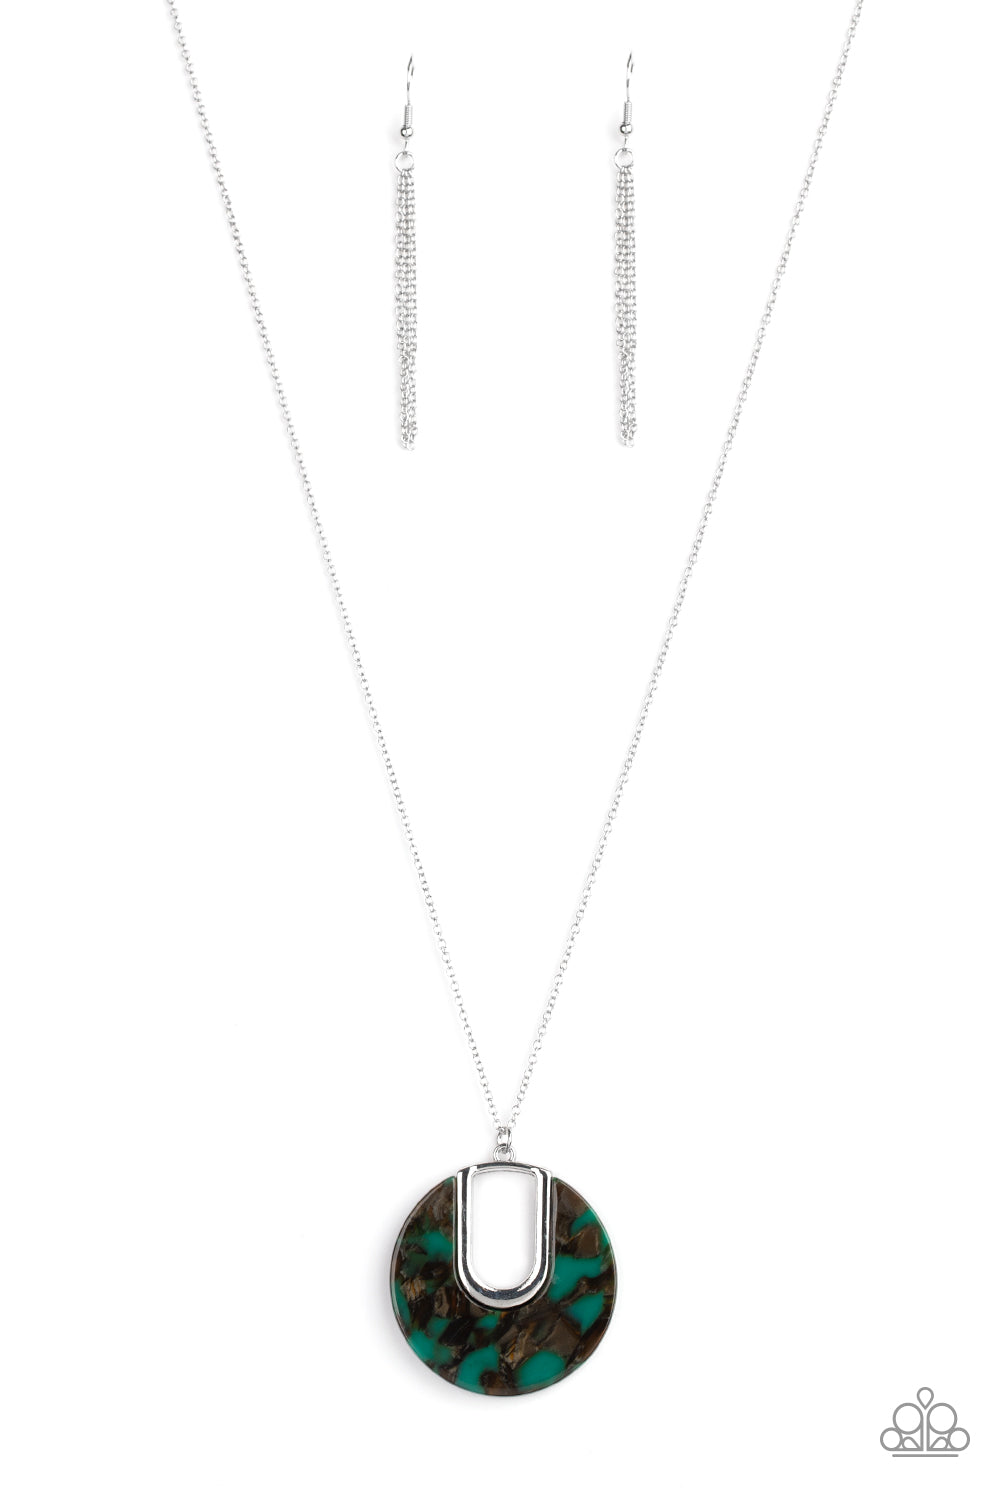 Setting The Fashion - Marble Green Acrylic Necklace - Paparazzi Accessories - Flecked in shimmer, a faux marble green acrylic piece is pressed into a shimmery silver frame, creating a retro pendant at the bottom of a lengthened silver chain. Features an adjustable clasp closure. Sold as one individual necklace.